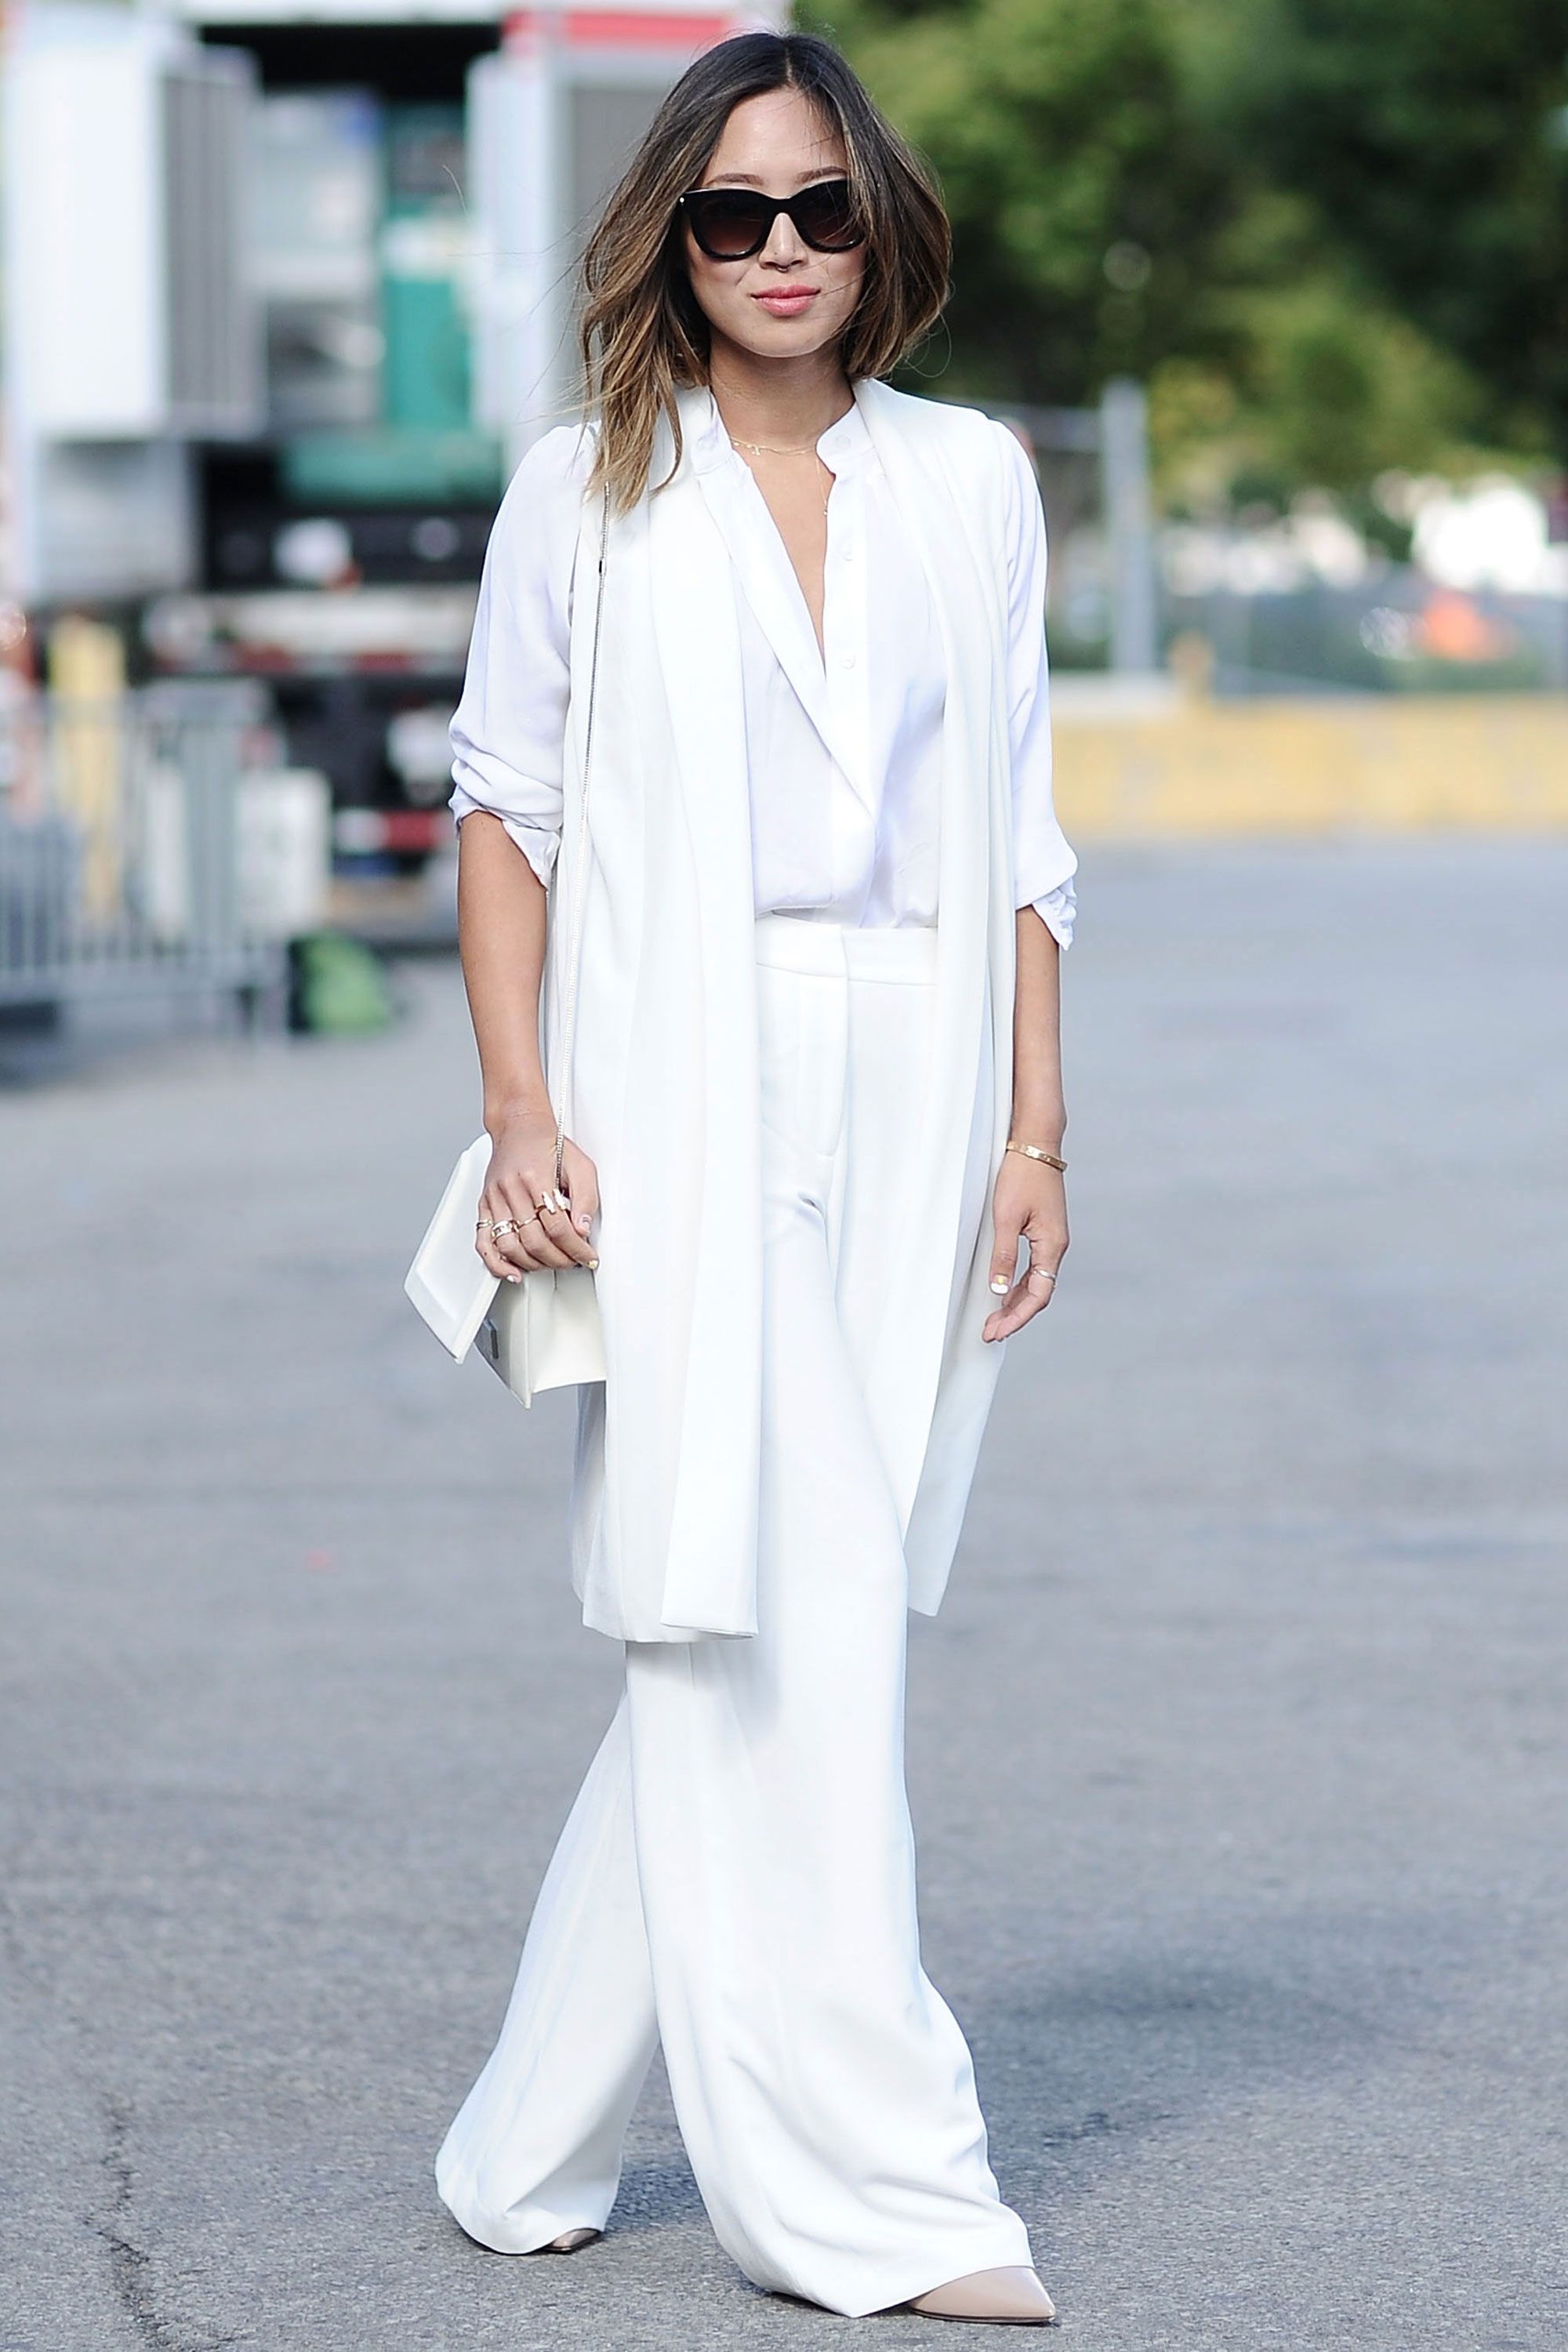 Celebrity White Outfit Ideas - White Outfit Inspiration